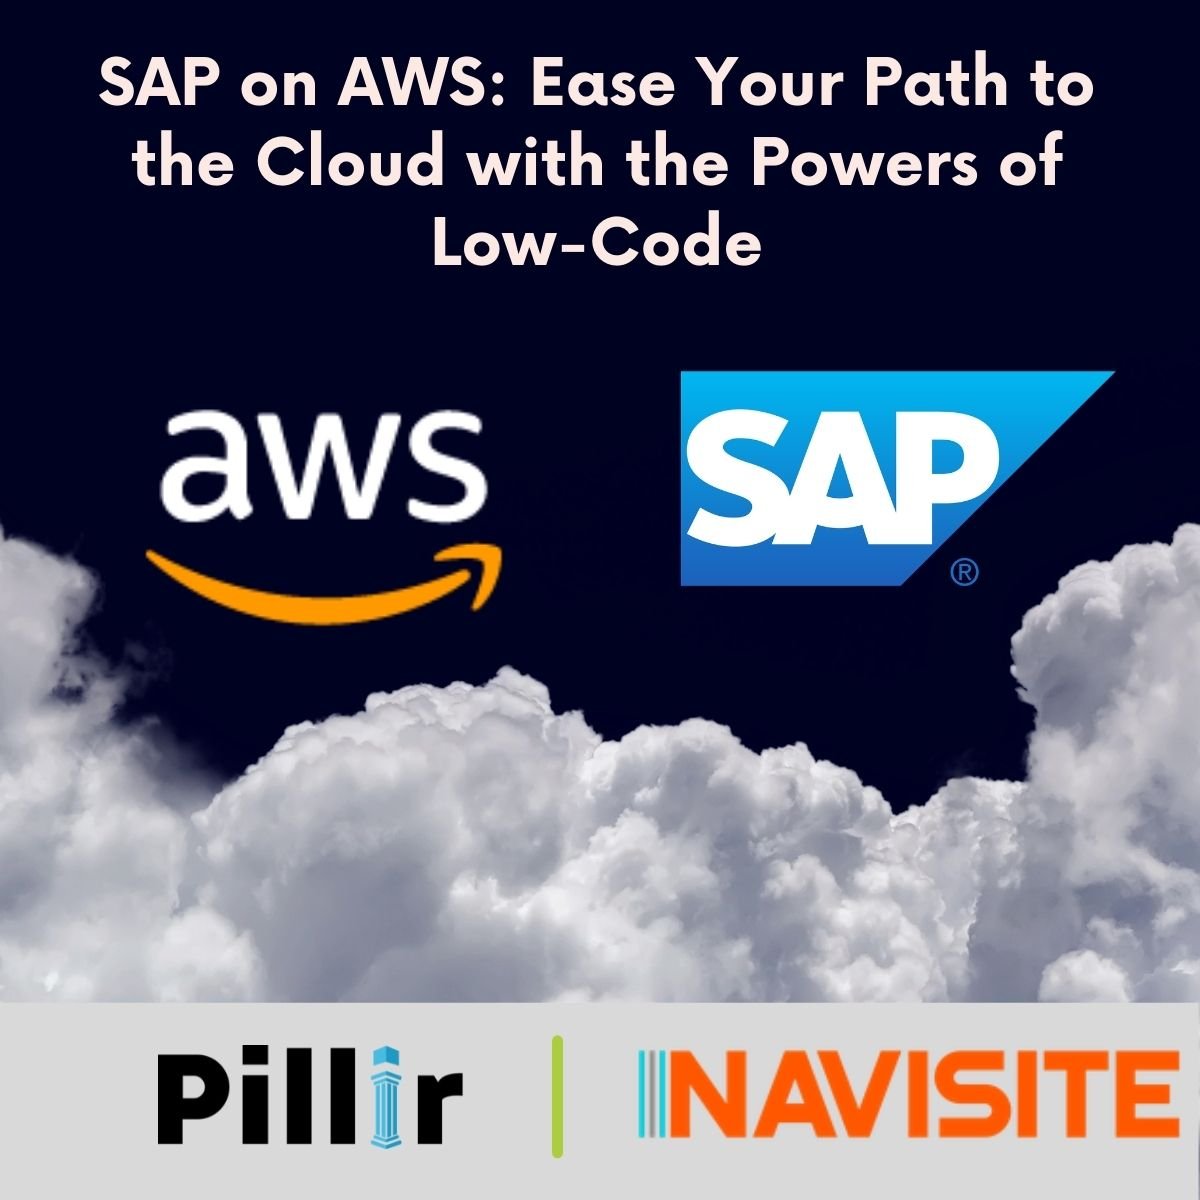 SAP on AWS: Ease Your Path to the Cloud with the Powers of Low-Code